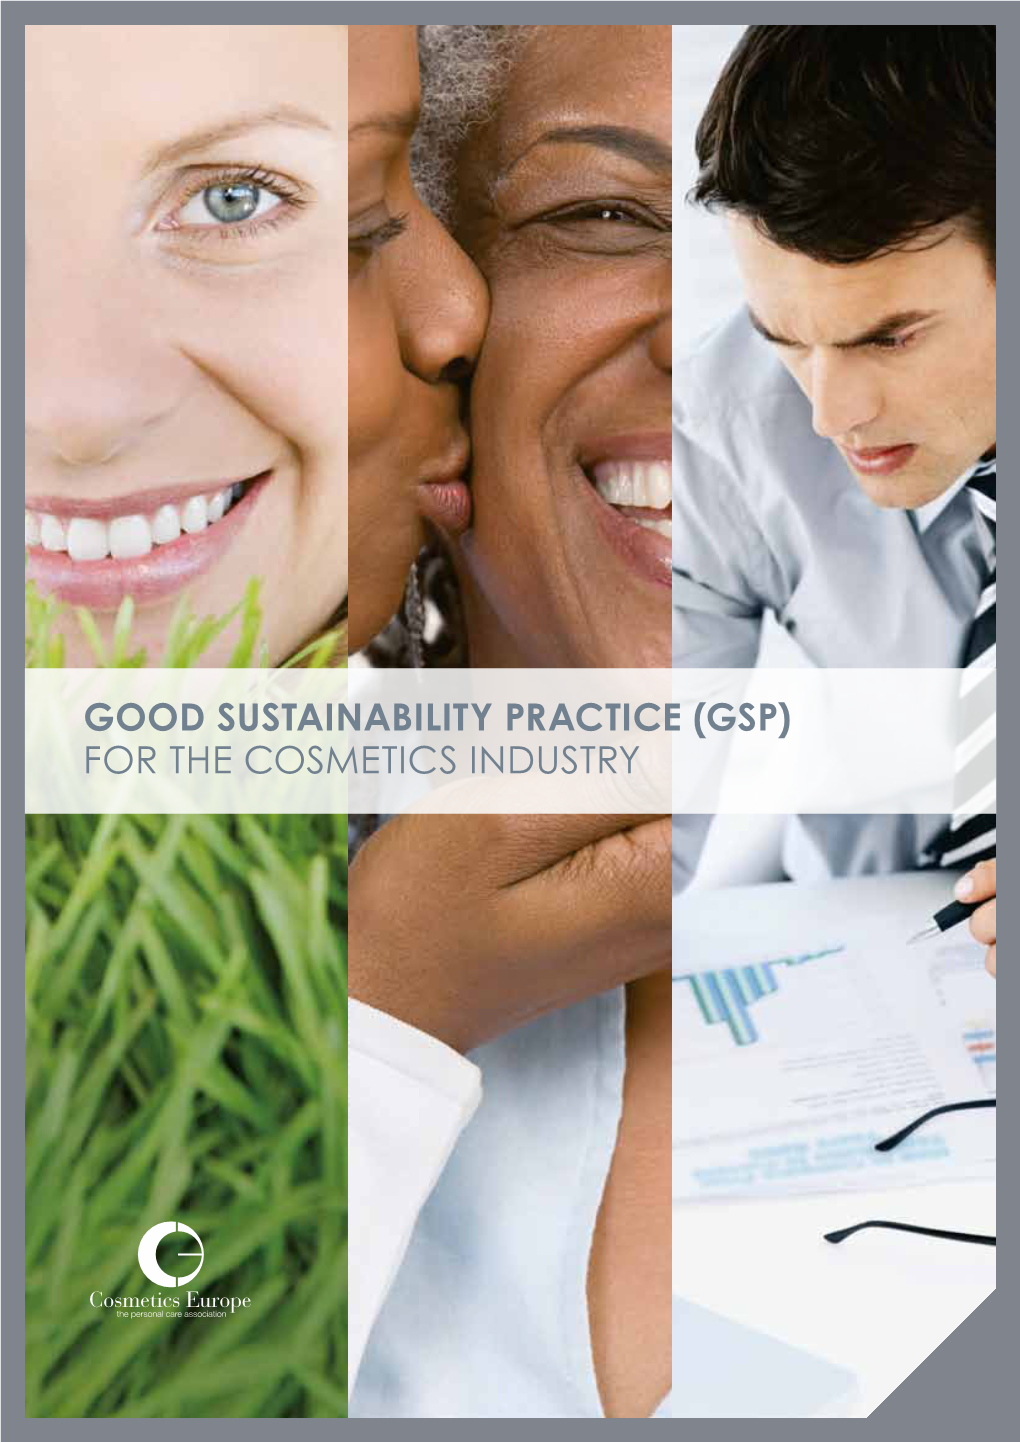 Good Sustainability Practice (GSP) for the Cosmetics Industry Summary